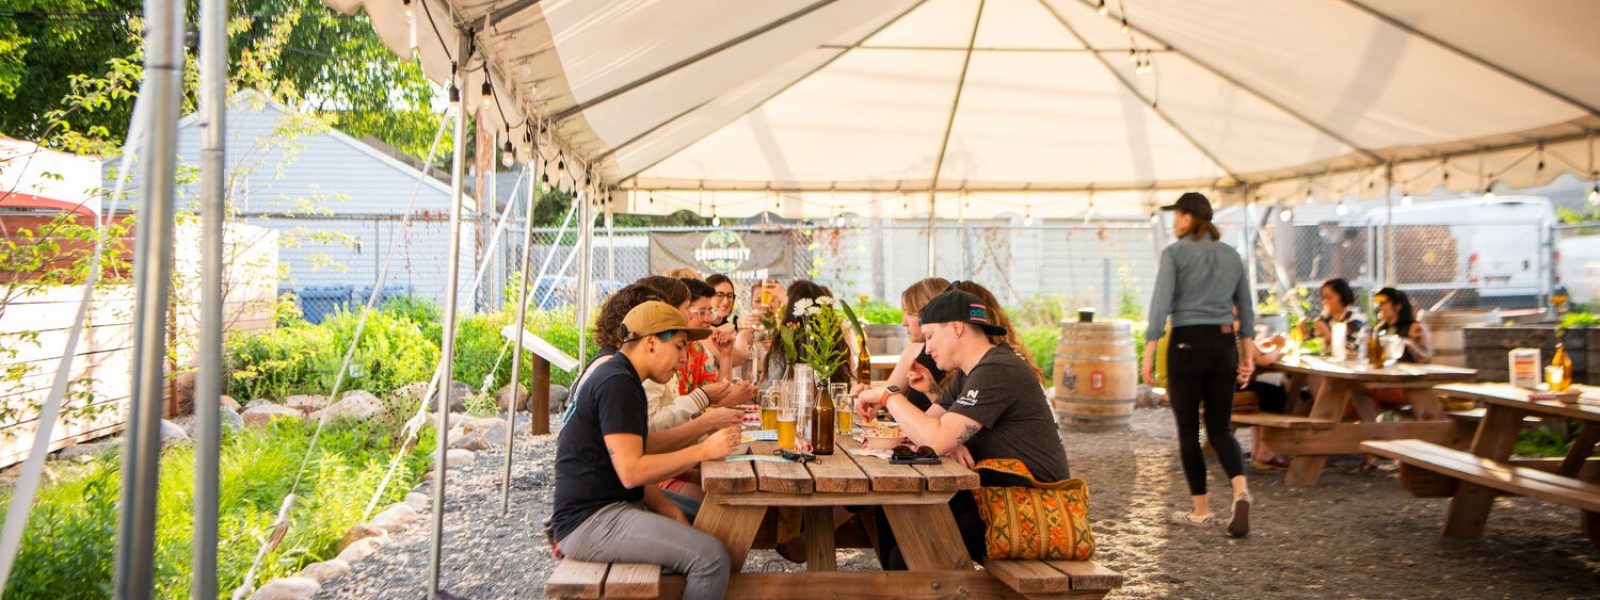 people sitting outdoors under a tent enjoying a meal